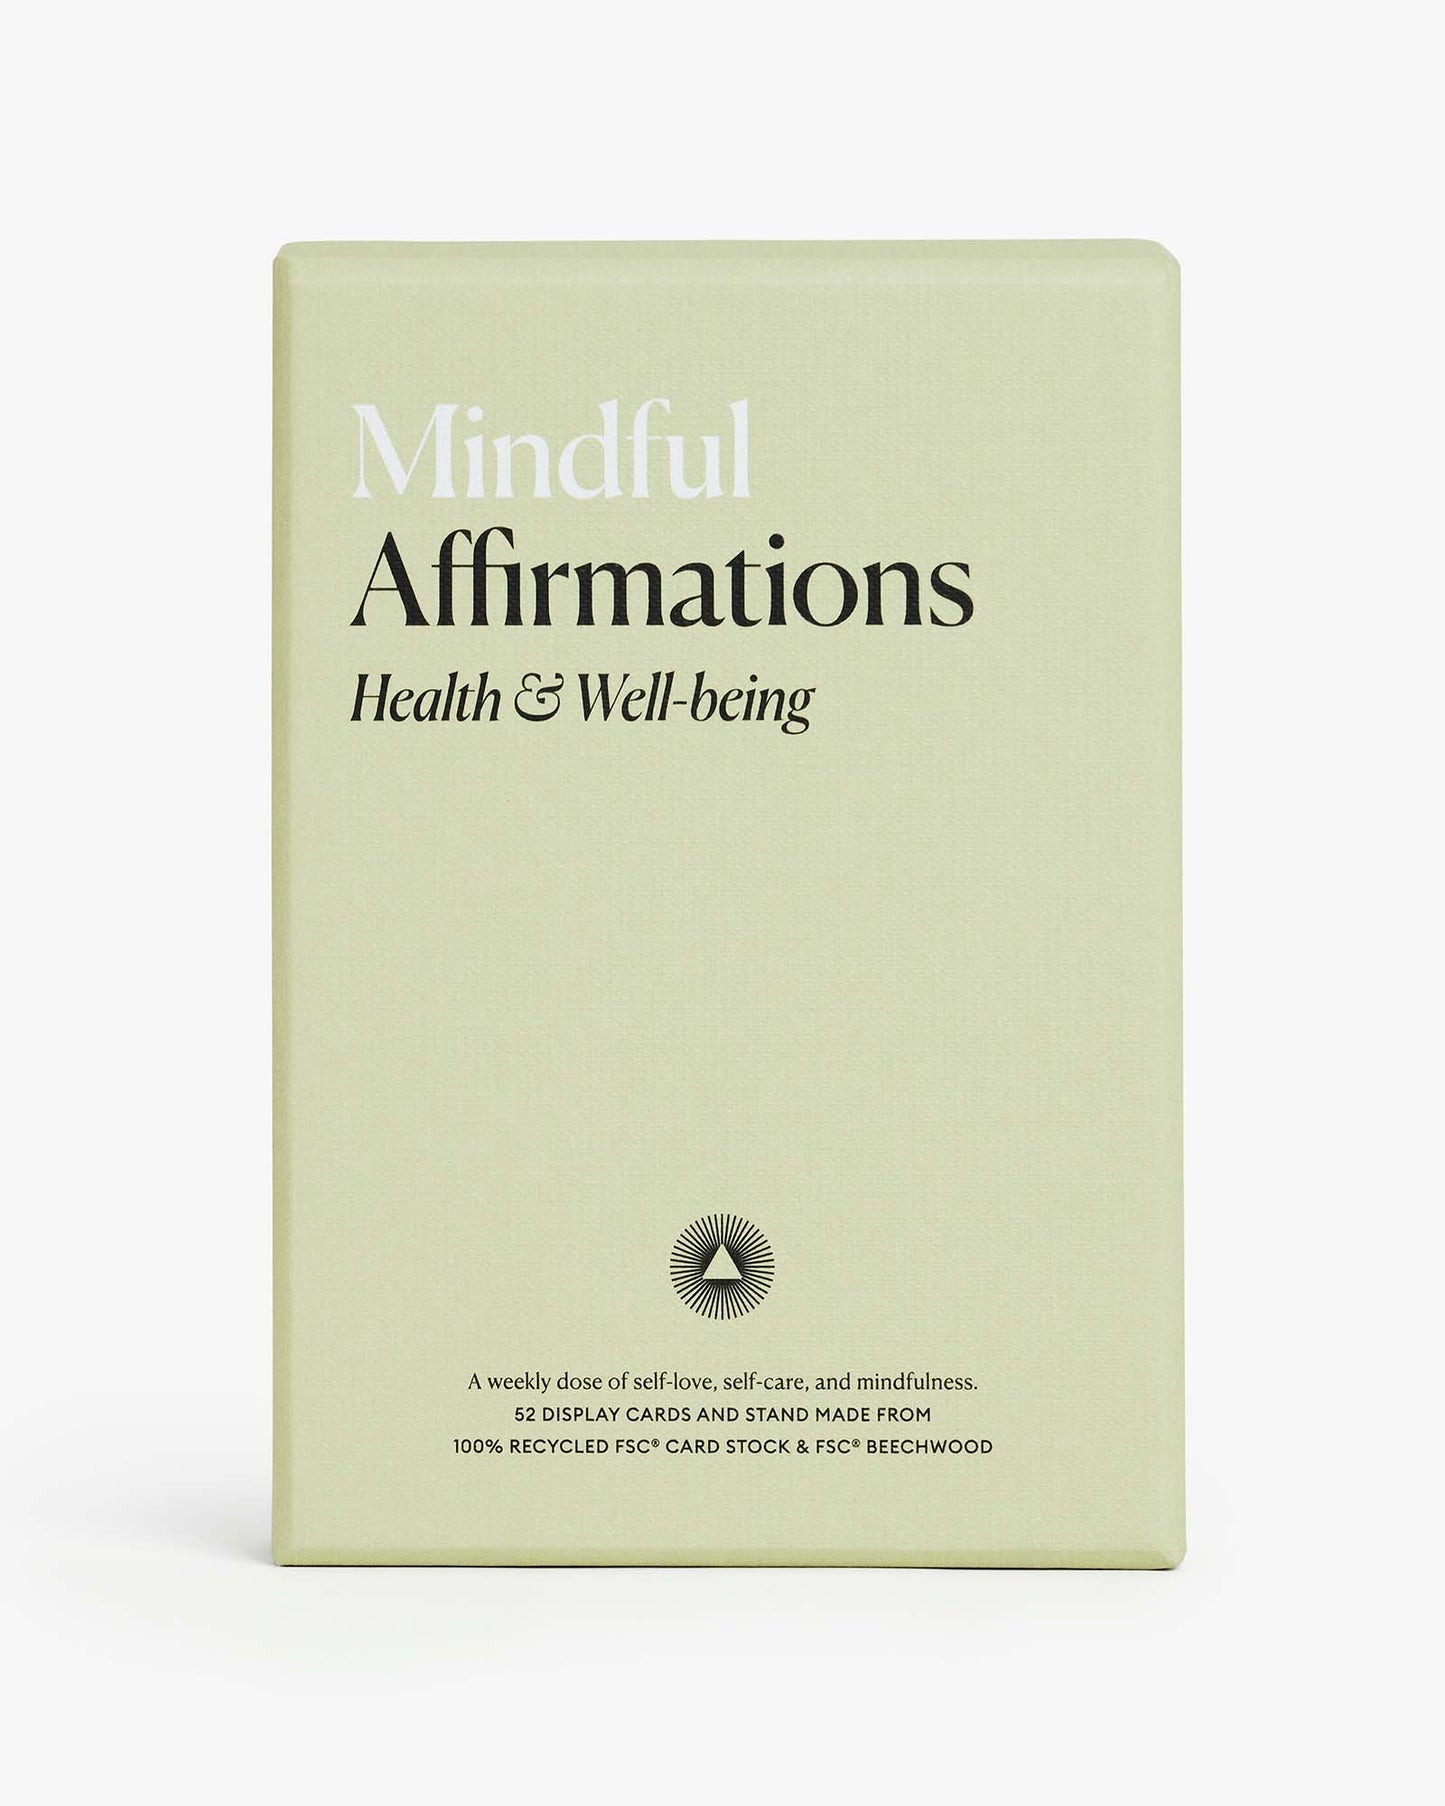 Mindful Affirmations for Health & Wellbeing by Intelligent Change